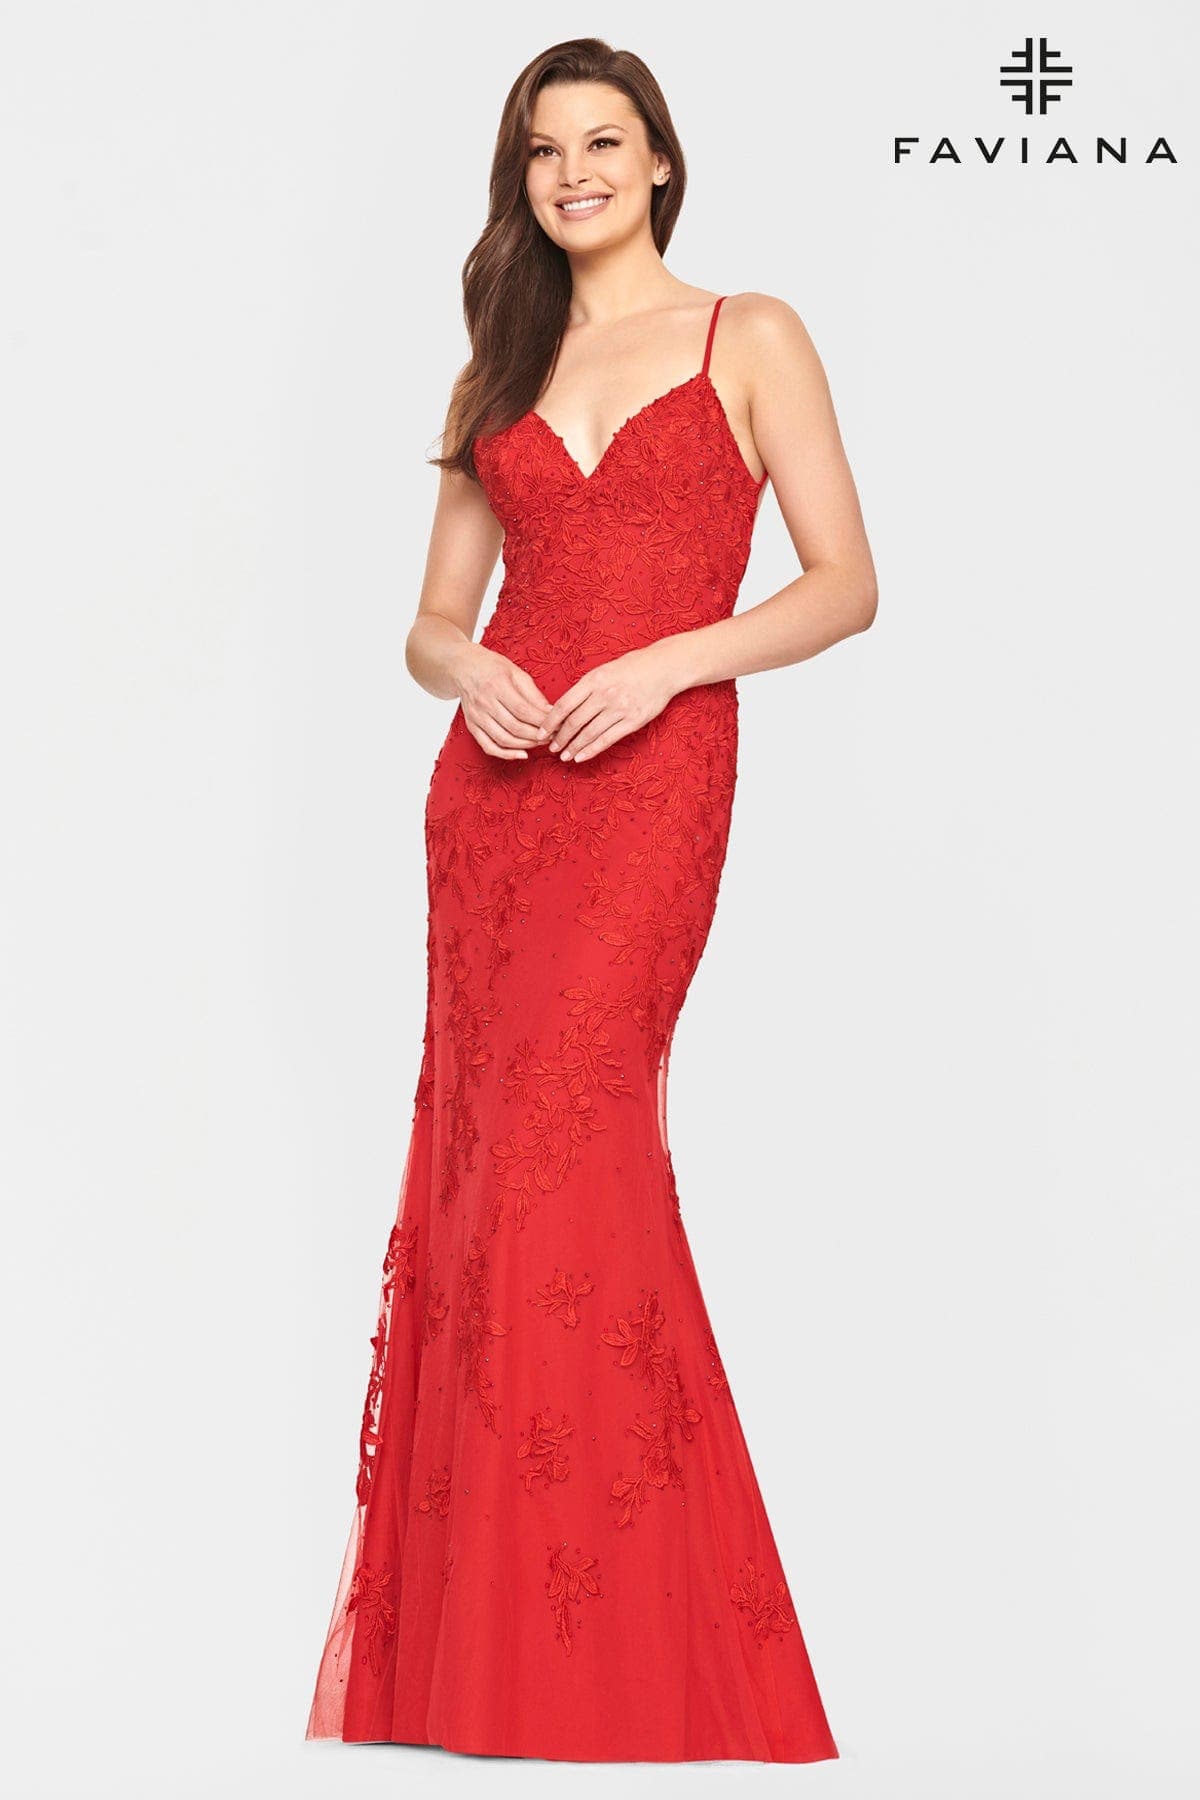 Red long v-neck dress made with dainty lace tulle 